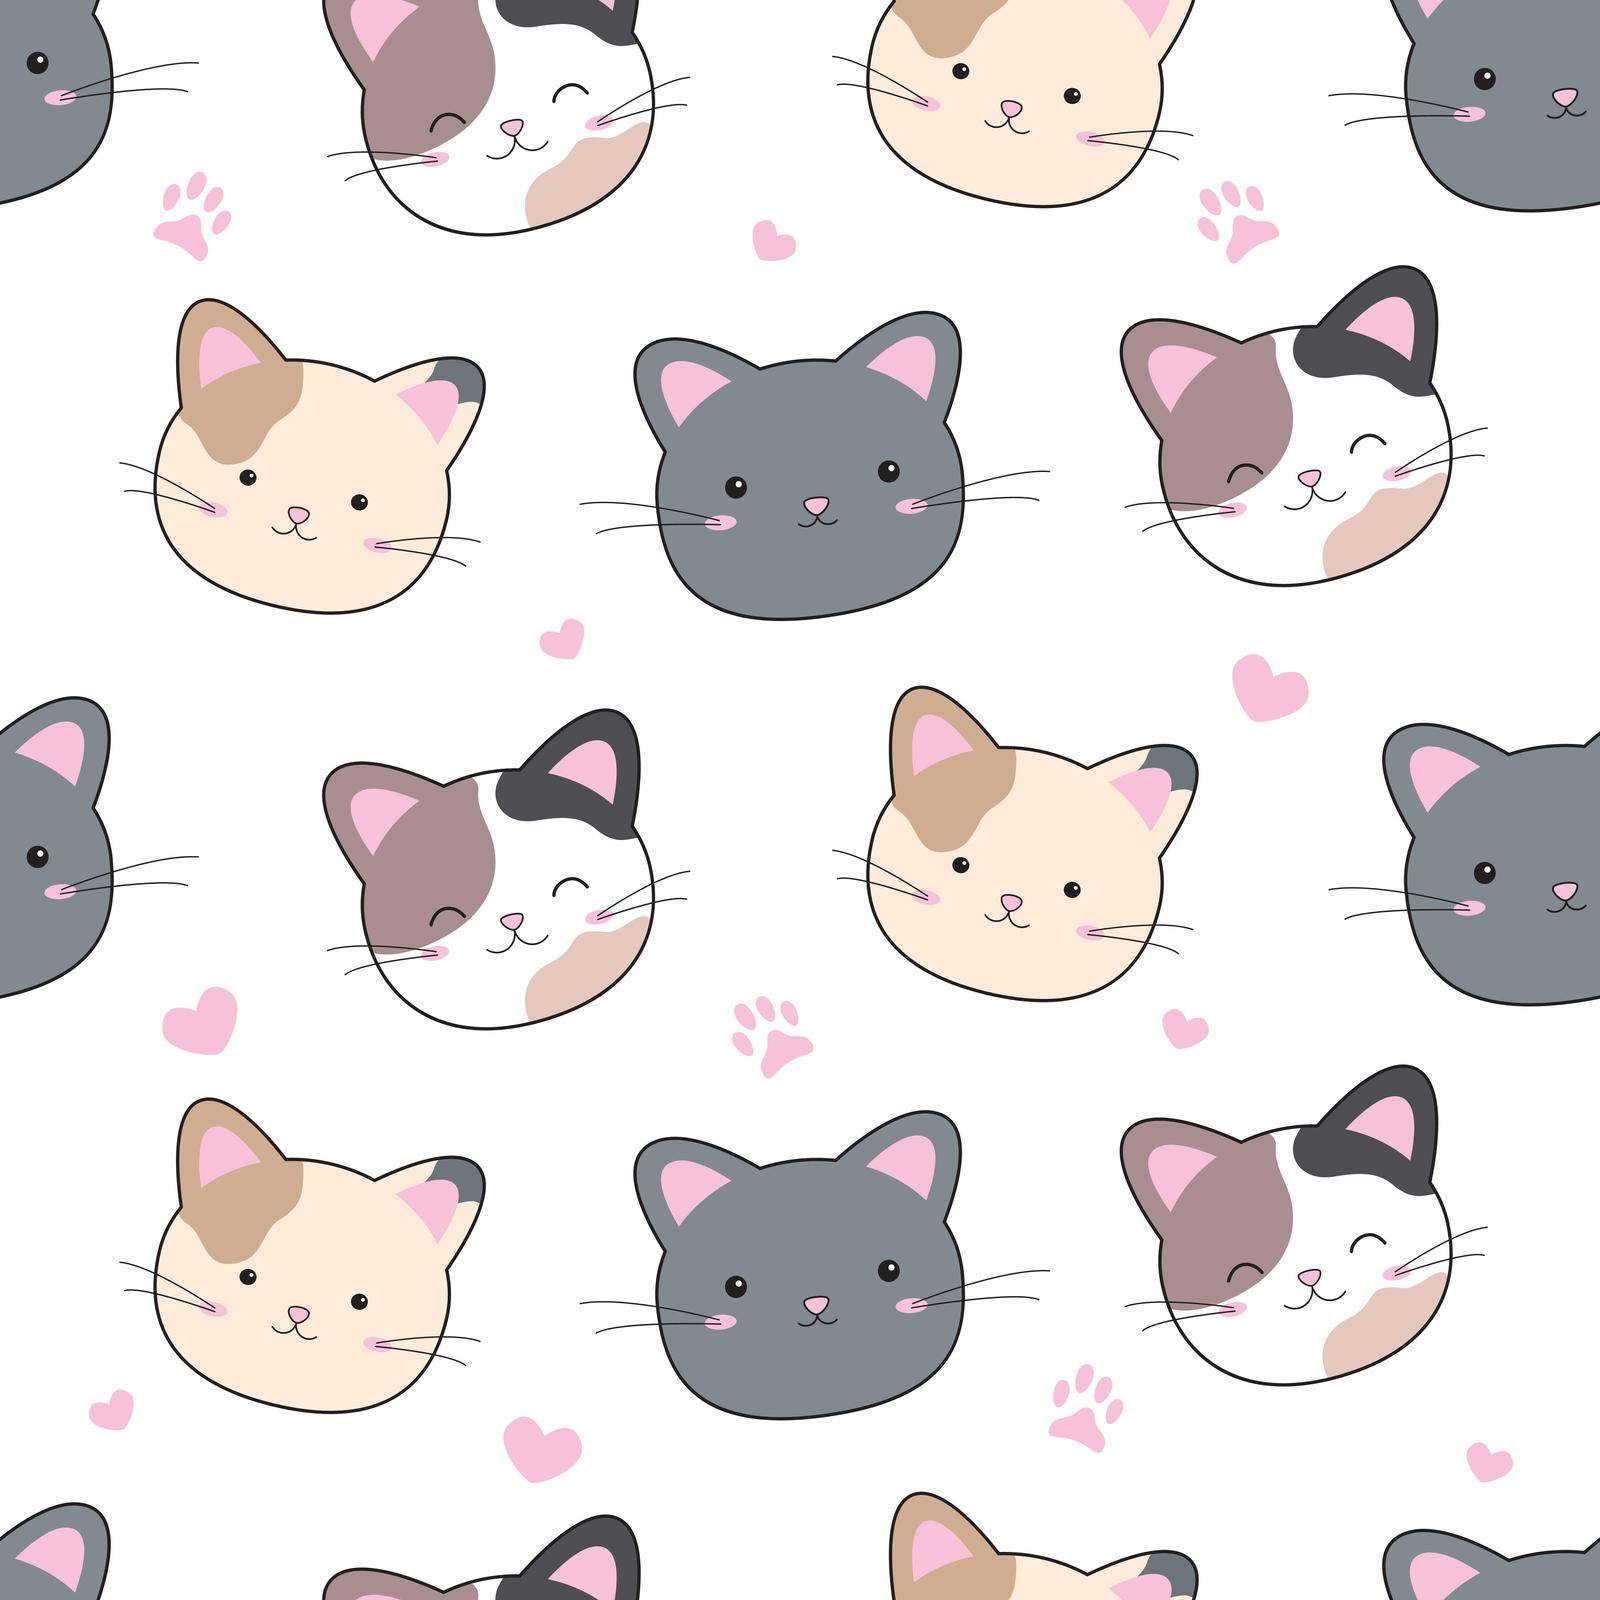 Cat and heart seamless pattern on white background vector illustration by Myimagine